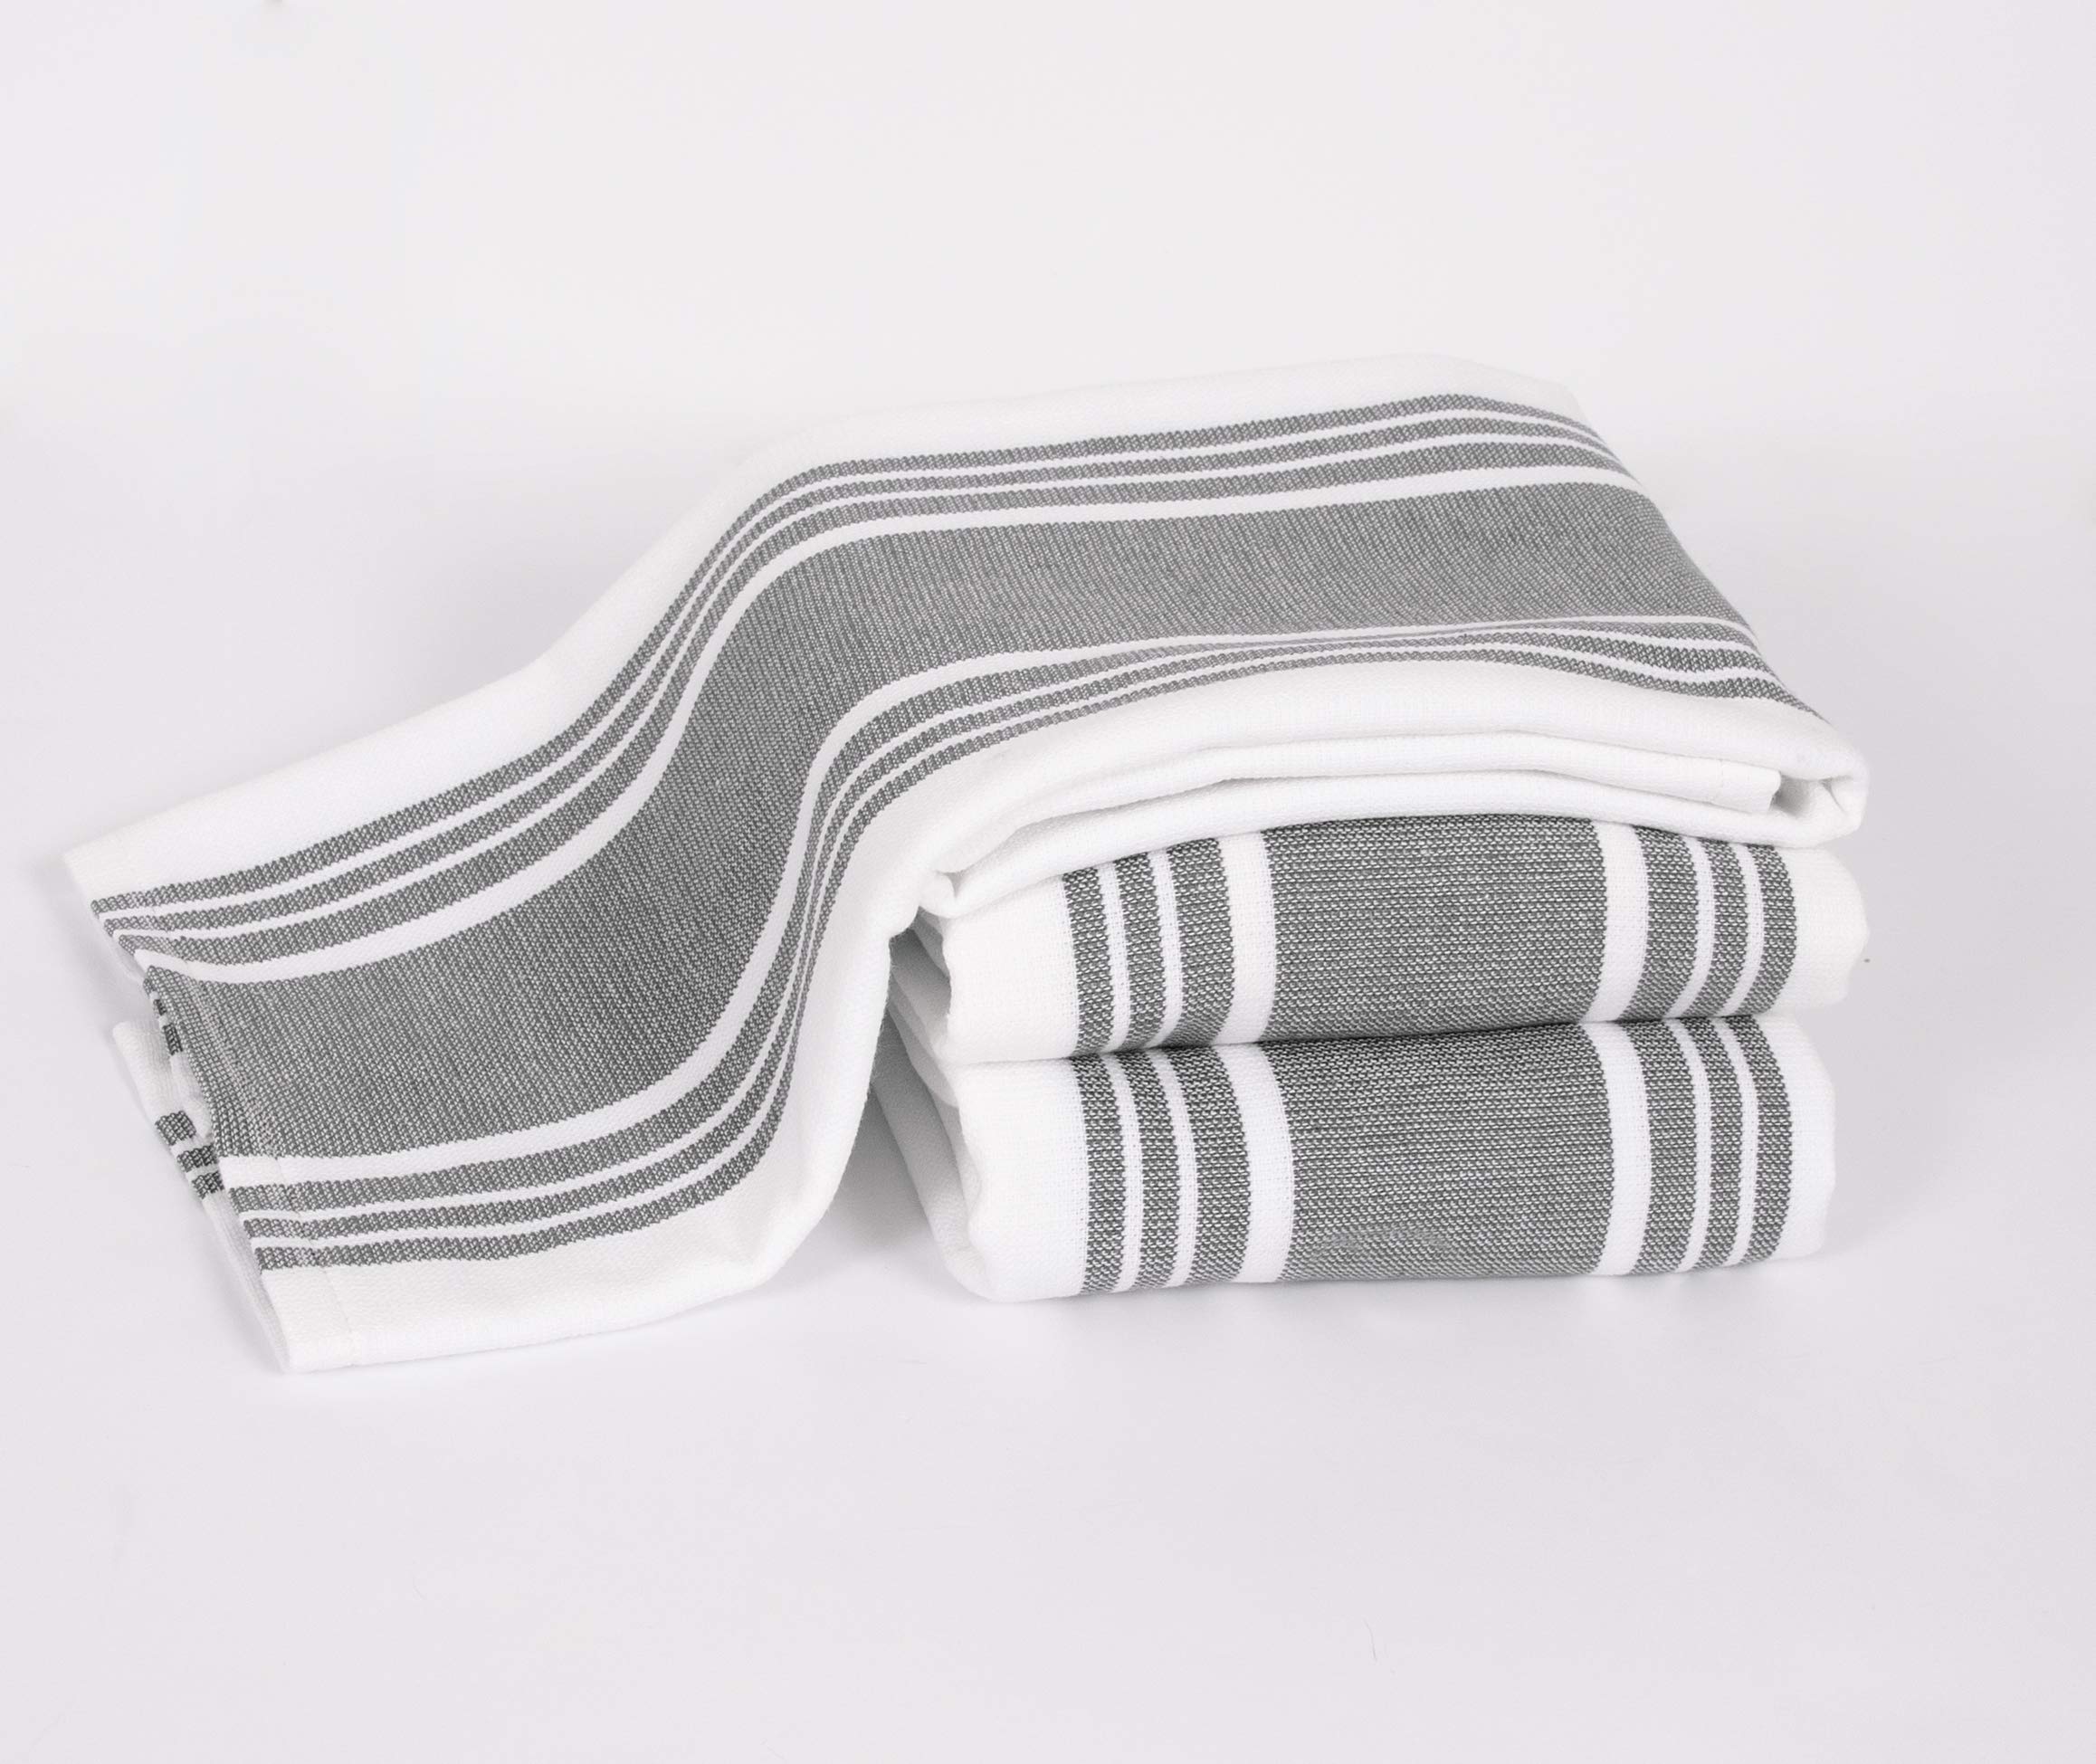 Dish Towels Dual Purpose Reversible, 100% Absorbent Cotton, Kitchen Towels Set of 3 Striped, 17